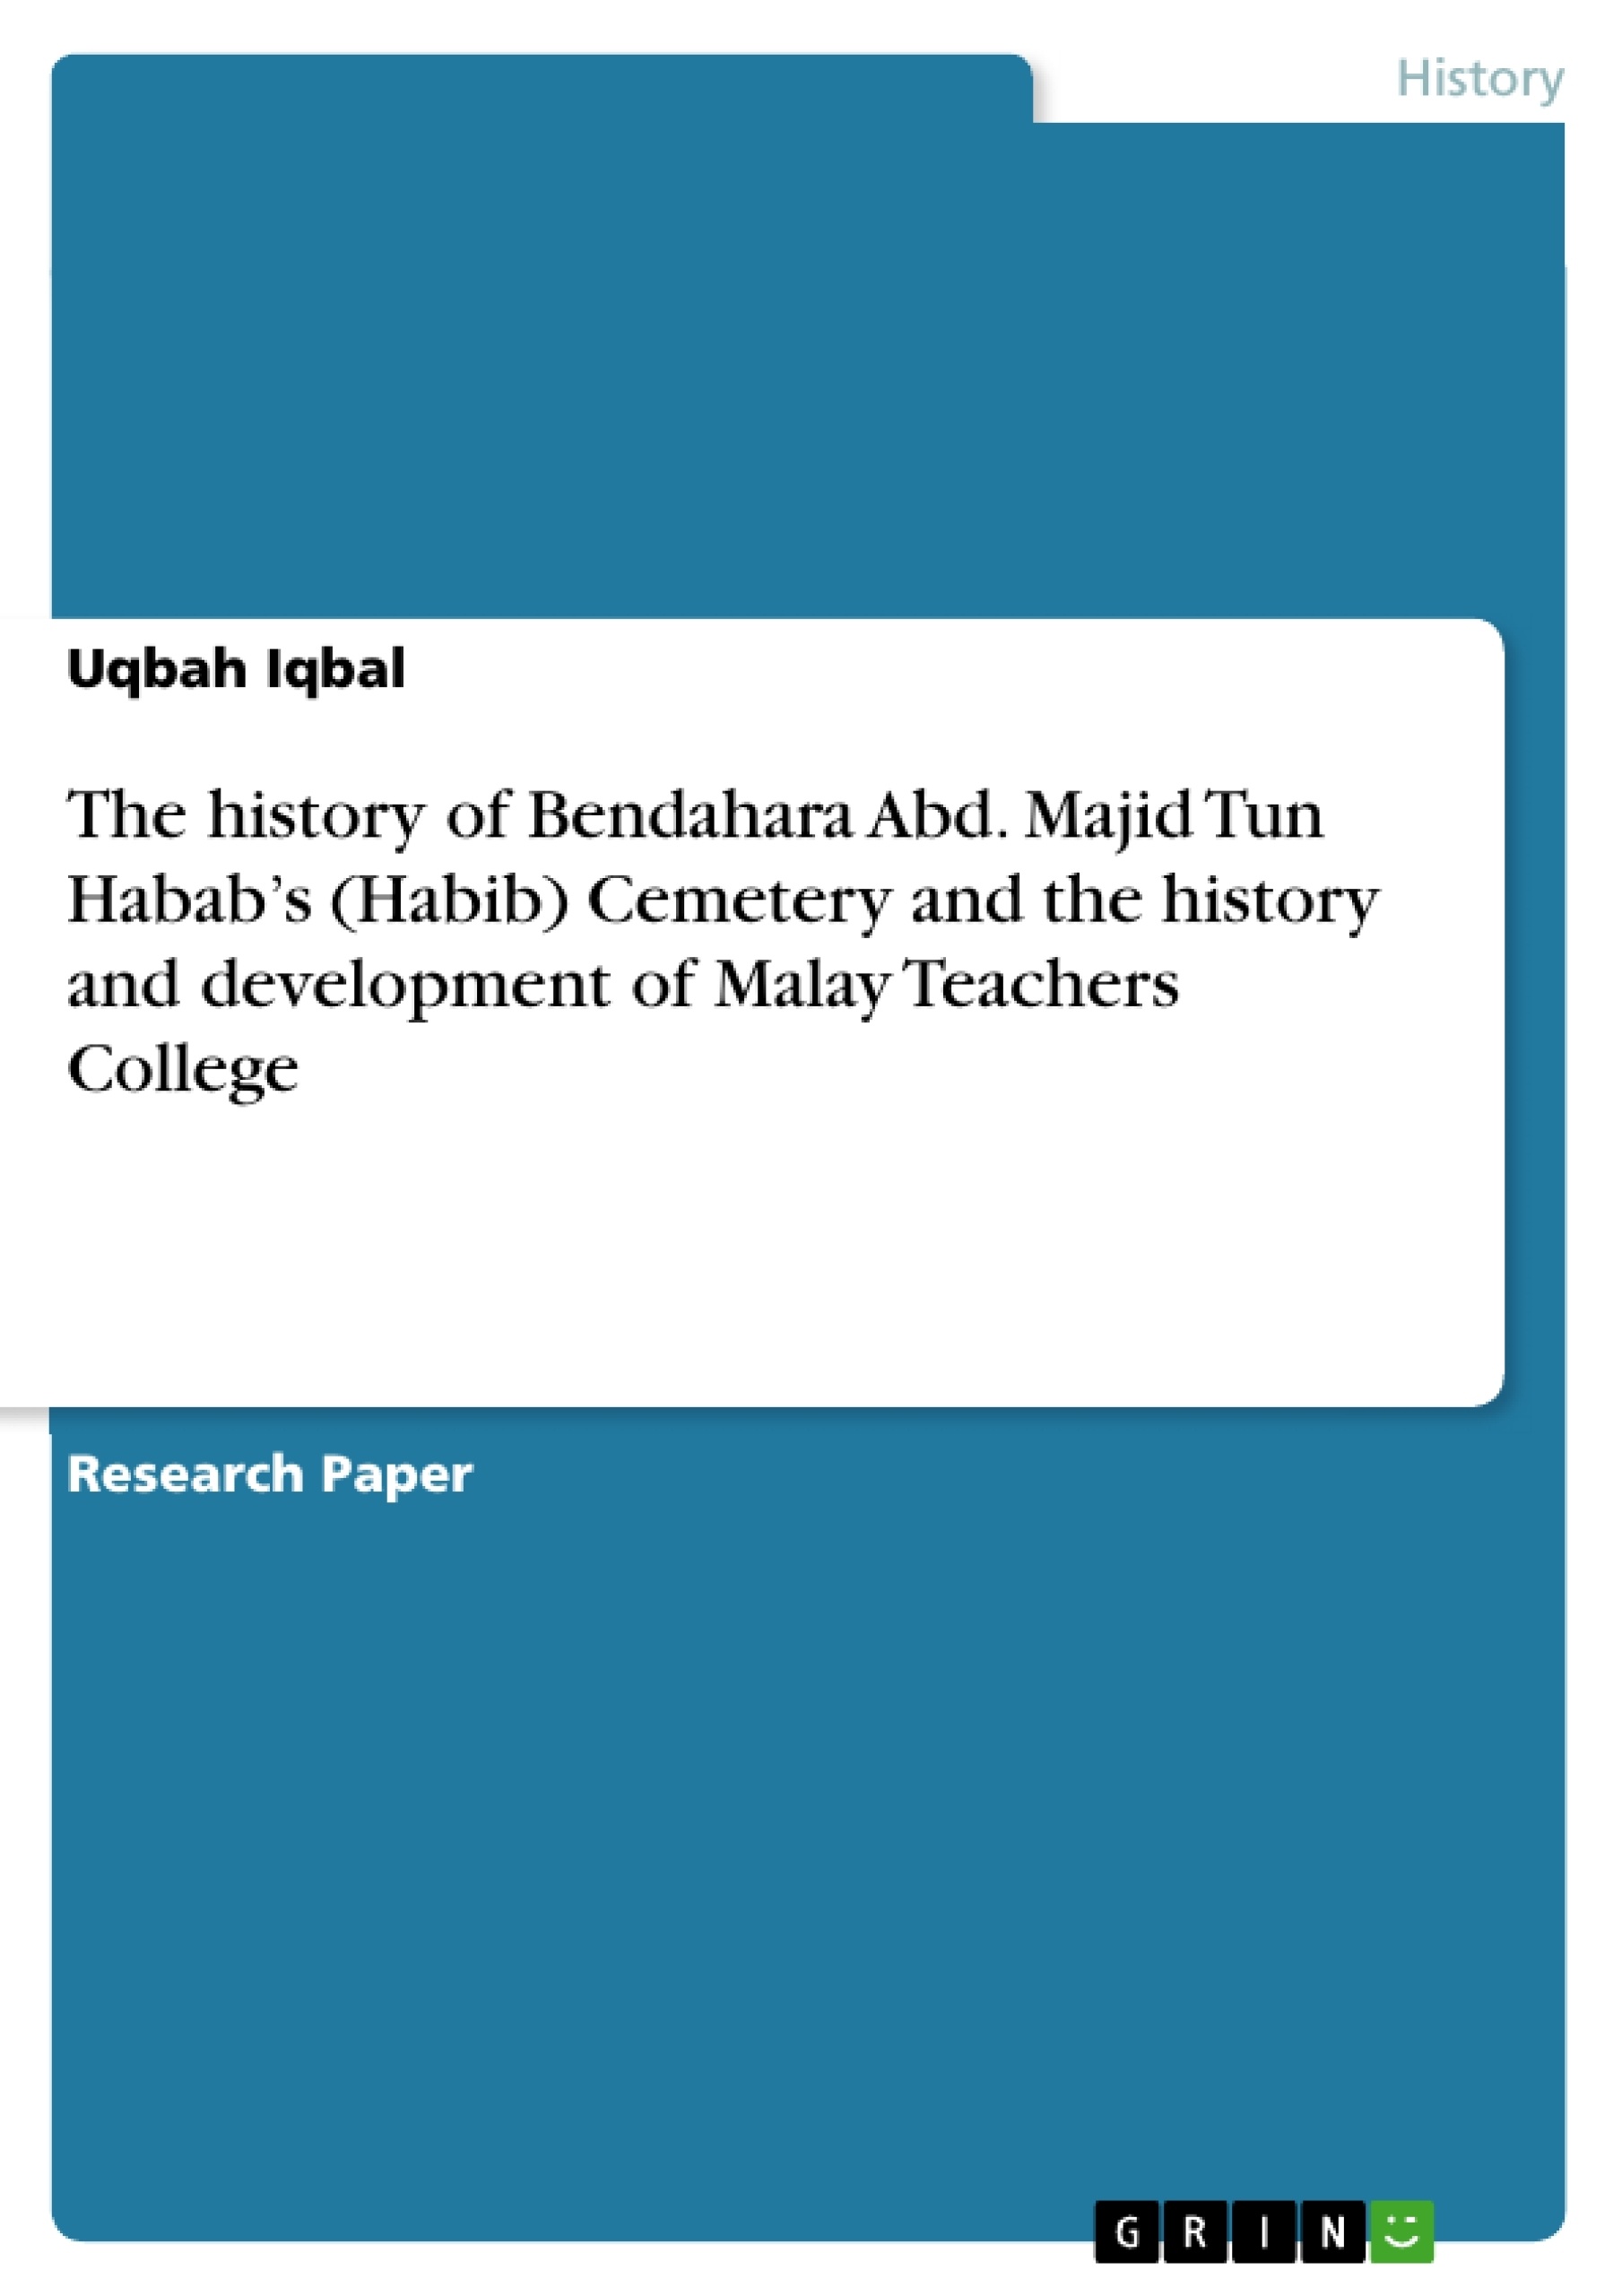 Title: The history of Bendahara Abd. Majid Tun Habab’s (Habib) Cemetery and the history and development of Malay Teachers College